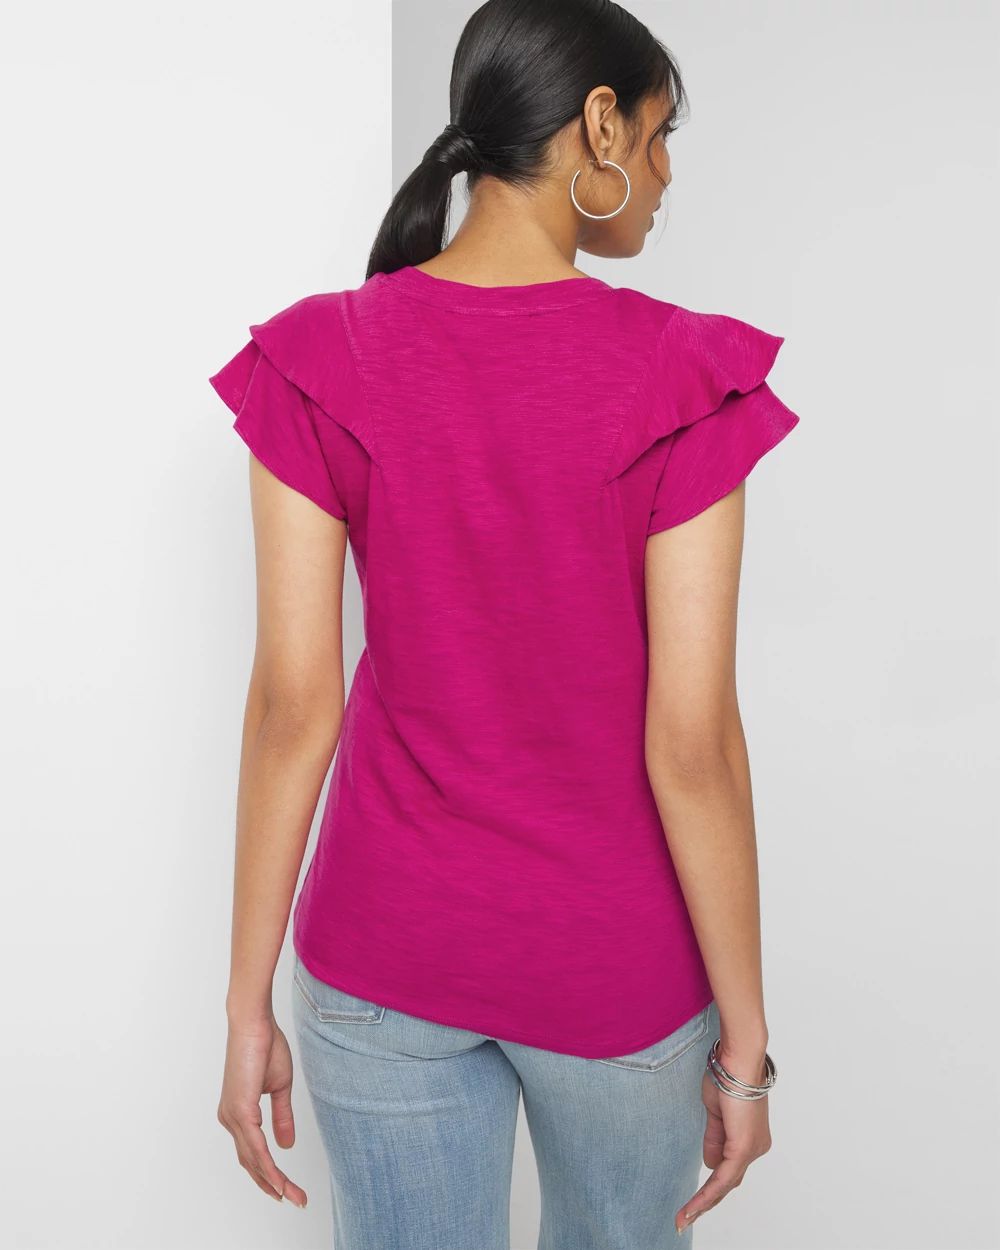 Ruffle Sleeve Tee click to view larger image.